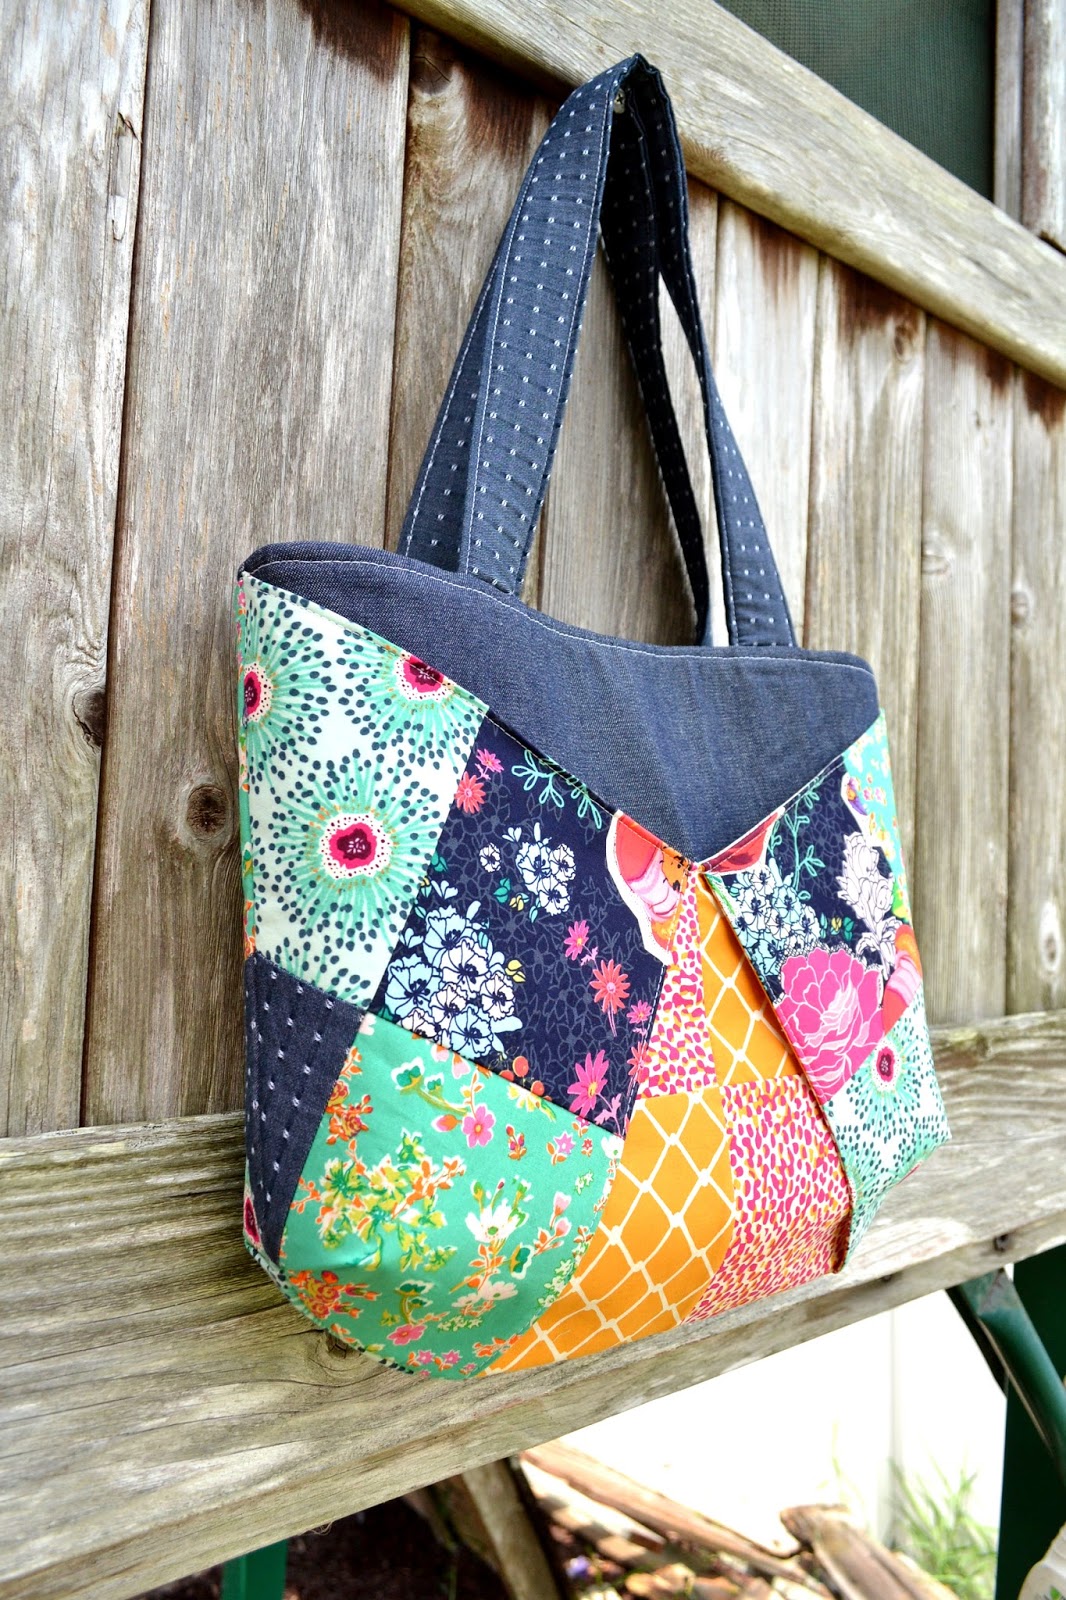 Blue Susan makes: Colorful Patchwork Bags and Baskets- Craftsy Class Review